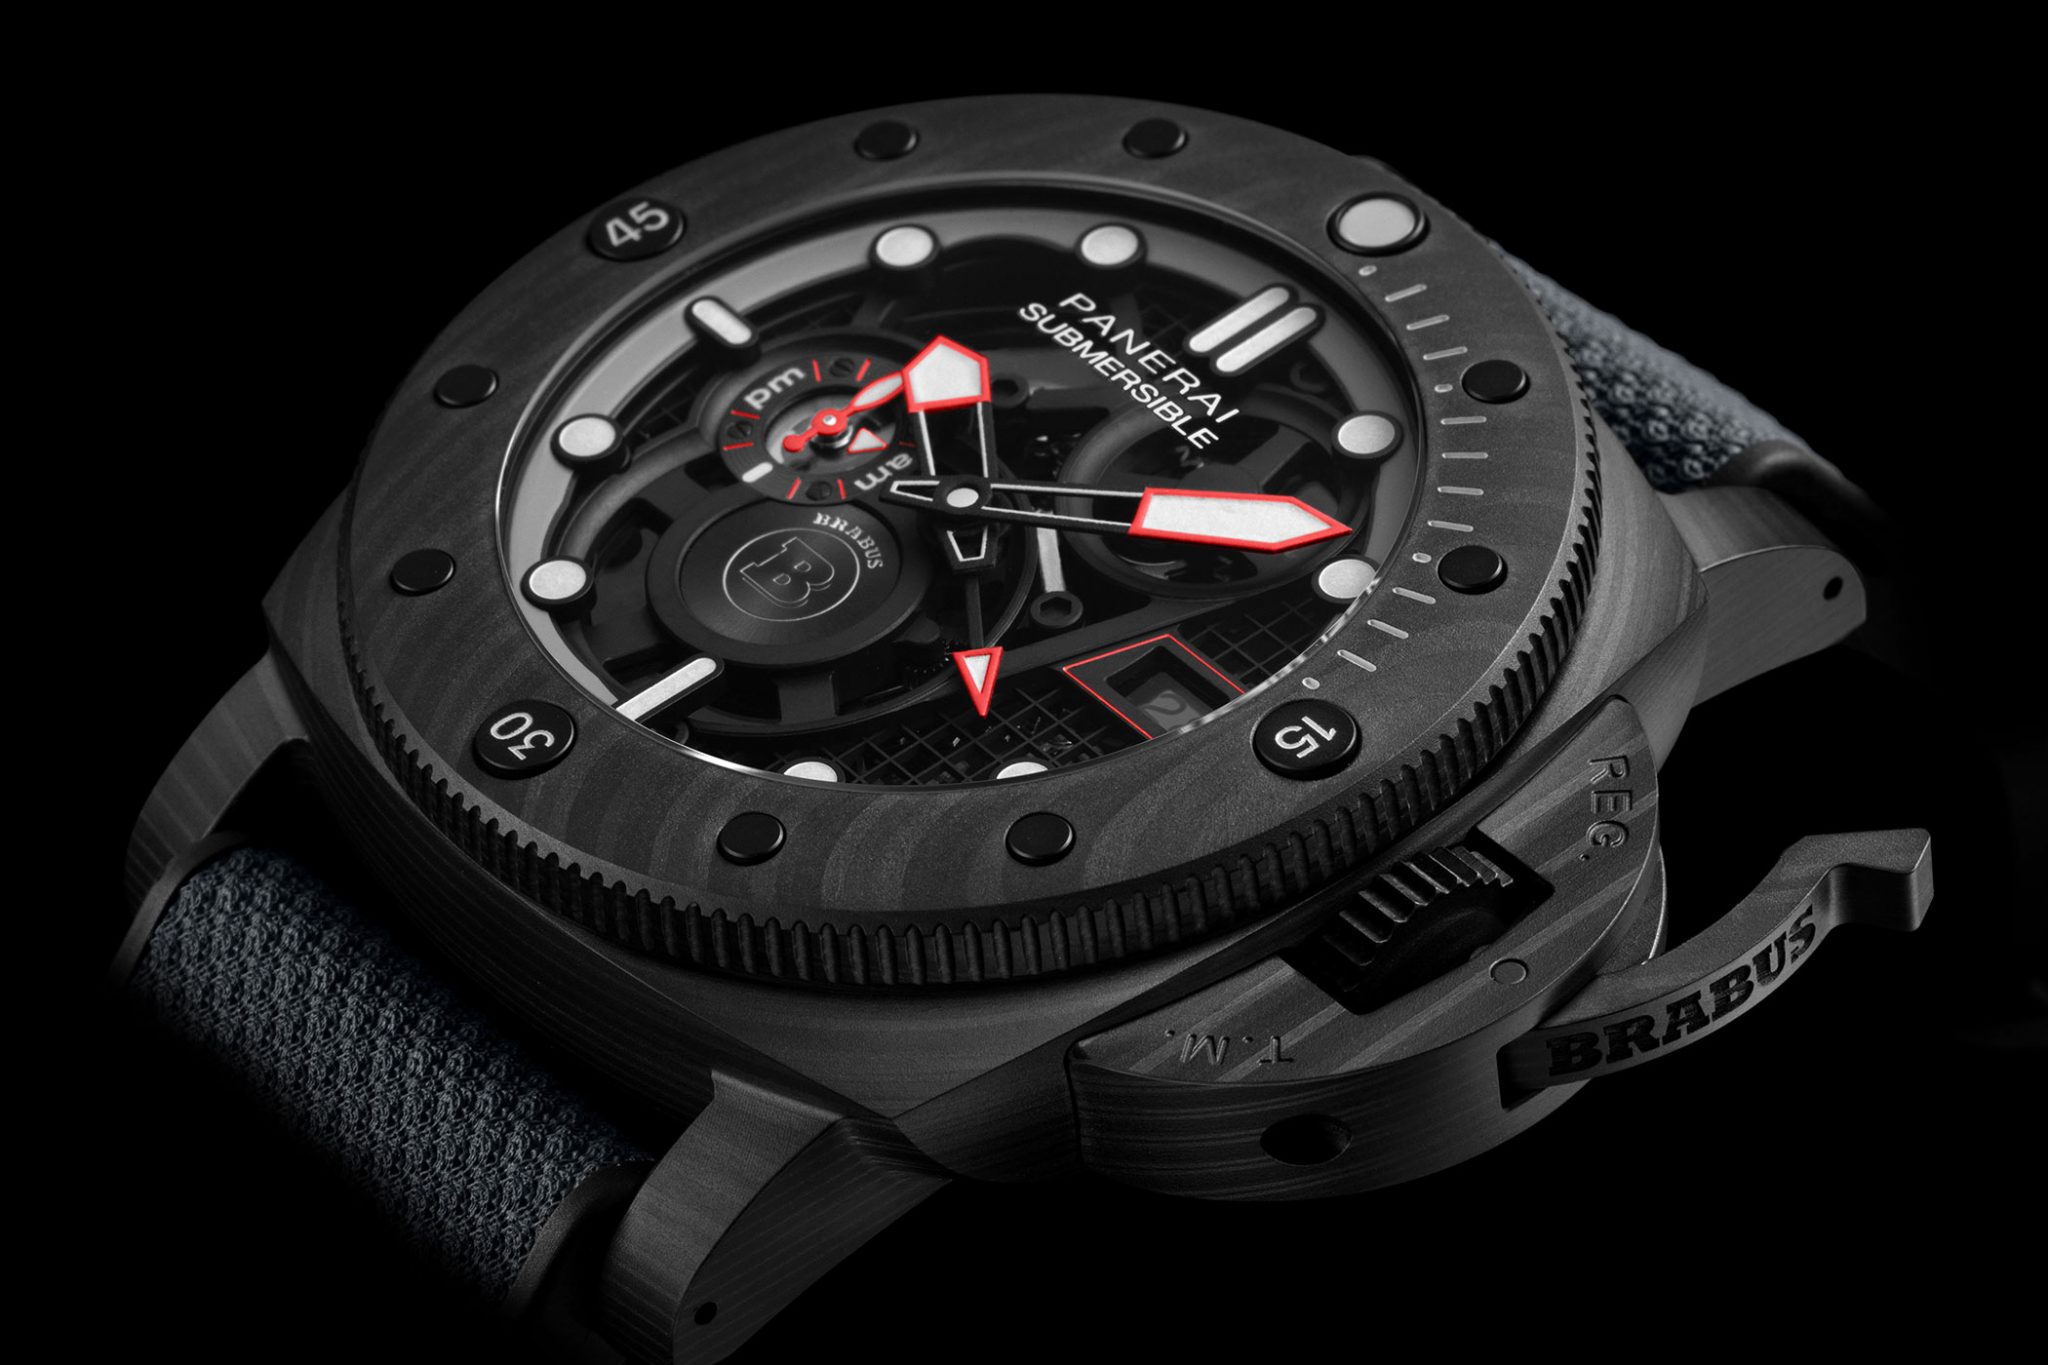 Panerai Submersible S BRABUS Black Ops Edition PAM01240 Carbotech Gehäuse